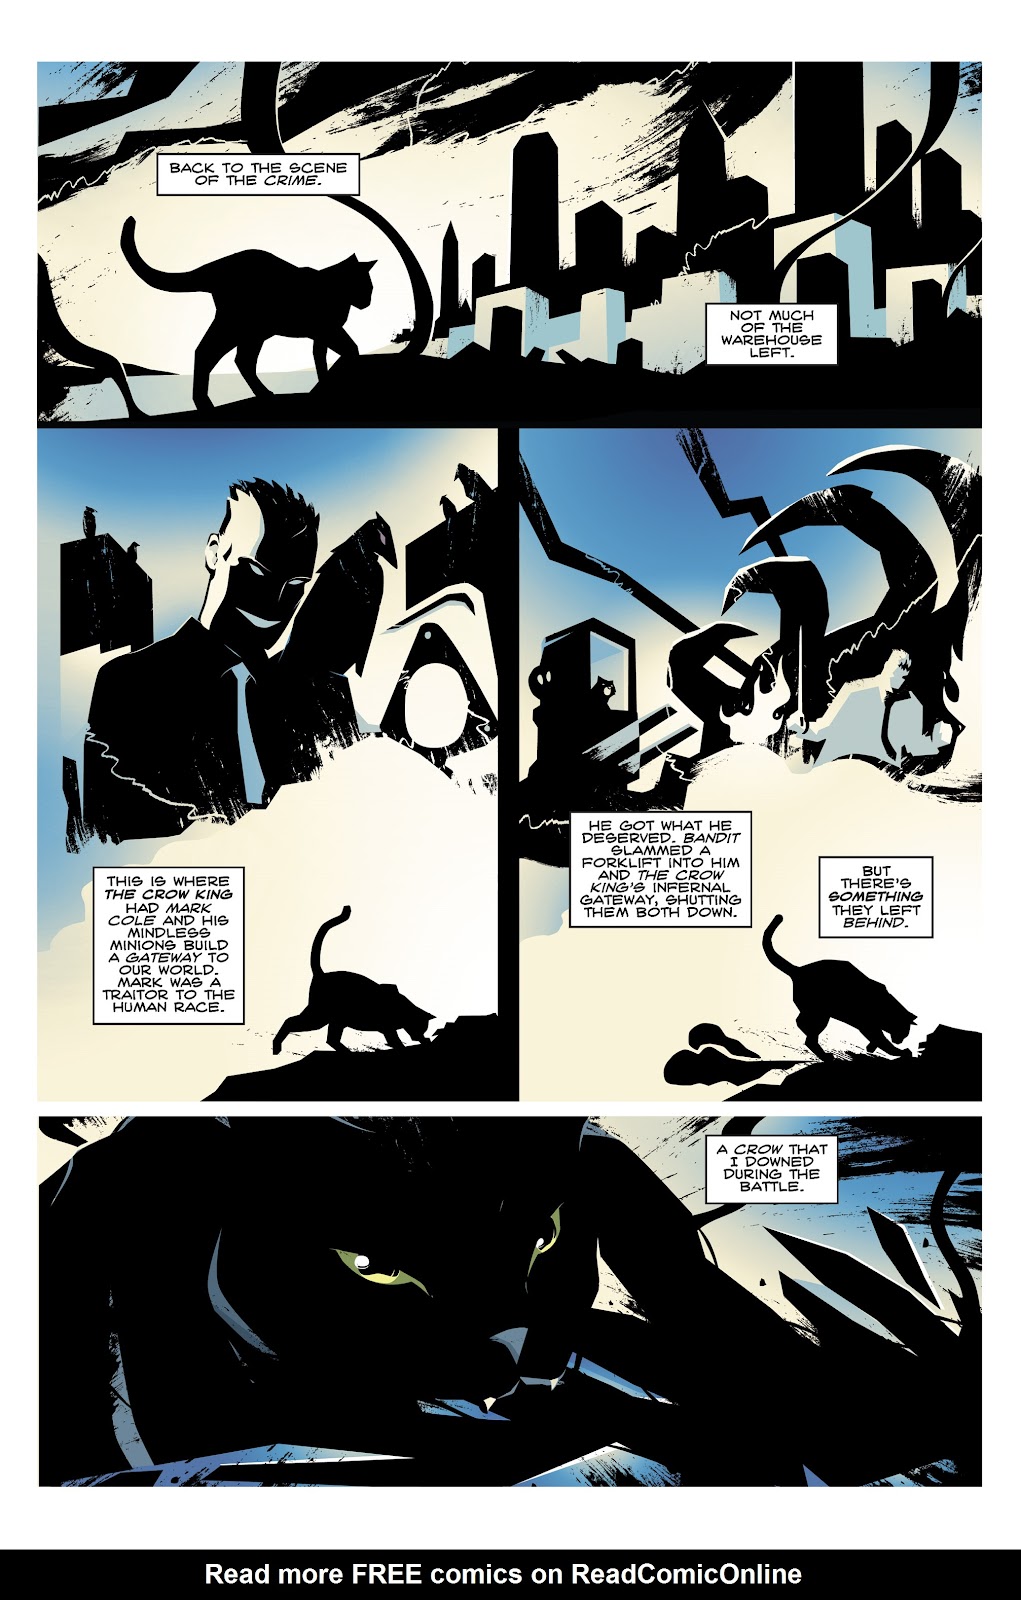 Hero Cats: Midnight Over Stellar City Vol. 2 issue 1 - Page 9